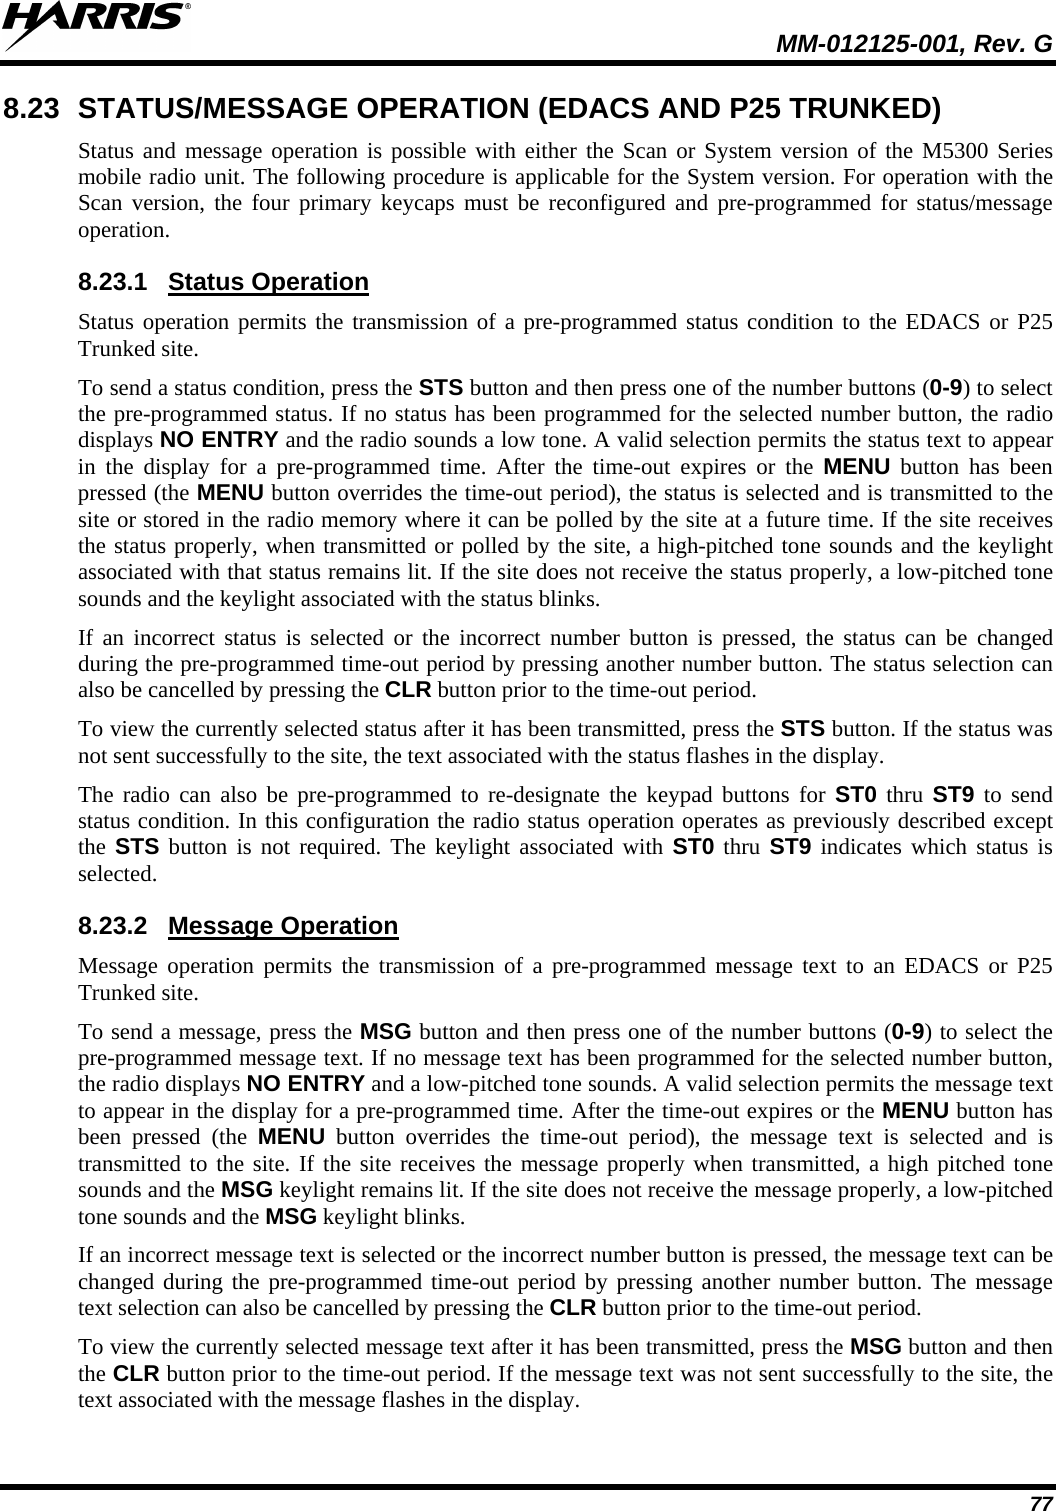  MM-012125-001, Rev. G 77 8.23 STATUS/MESSAGE OPERATION (EDACS AND P25 TRUNKED) Status and message operation is possible with either the Scan or System version of the M5300 Series mobile radio unit. The following procedure is applicable for the System version. For operation with the Scan version, the four primary keycaps must be reconfigured and pre-programmed for status/message operation. 8.23.1 Status operation permits the transmission of a pre-programmed status condition to the EDACS or P25 Trunked site. Status Operation To send a status condition, press the STS button and then press one of the number buttons (0-9) to select the pre-programmed status. If no status has been programmed for the selected number button, the radio displays NO ENTRY and the radio sounds a low tone. A valid selection permits the status text to appear in the display for a pre-programmed time. After the time-out expires or the MENU button has been pressed (the MENU button overrides the time-out period), the status is selected and is transmitted to the site or stored in the radio memory where it can be polled by the site at a future time. If the site receives the status properly, when transmitted or polled by the site, a high-pitched tone sounds and the keylight associated with that status remains lit. If the site does not receive the status properly, a low-pitched tone sounds and the keylight associated with the status blinks. If an incorrect status is selected or the incorrect number button is pressed, the status can be changed during the pre-programmed time-out period by pressing another number button. The status selection can also be cancelled by pressing the CLR button prior to the time-out period. To view the currently selected status after it has been transmitted, press the STS button. If the status was not sent successfully to the site, the text associated with the status flashes in the display. The radio can also be pre-programmed to re-designate the keypad buttons for ST0 thru  ST9 to send status condition. In this configuration the radio status operation operates as previously described except the  STS button is not required. The keylight associated with ST0 thru ST9 indicates which status is selected. 8.23.2 Message operation permits the transmission of a pre-programmed message text to an EDACS or P25 Trunked site. Message Operation To send a message, press the MSG button and then press one of the number buttons (0-9) to select the pre-programmed message text. If no message text has been programmed for the selected number button, the radio displays NO ENTRY and a low-pitched tone sounds. A valid selection permits the message text to appear in the display for a pre-programmed time. After the time-out expires or the MENU button has been pressed (the MENU button overrides the time-out period), the message text is selected and is transmitted to the site. If the site receives the message properly when transmitted, a high pitched tone sounds and the MSG keylight remains lit. If the site does not receive the message properly, a low-pitched tone sounds and the MSG keylight blinks. If an incorrect message text is selected or the incorrect number button is pressed, the message text can be changed during the pre-programmed time-out period by pressing another number button. The message text selection can also be cancelled by pressing the CLR button prior to the time-out period. To view the currently selected message text after it has been transmitted, press the MSG button and then the CLR button prior to the time-out period. If the message text was not sent successfully to the site, the text associated with the message flashes in the display. 